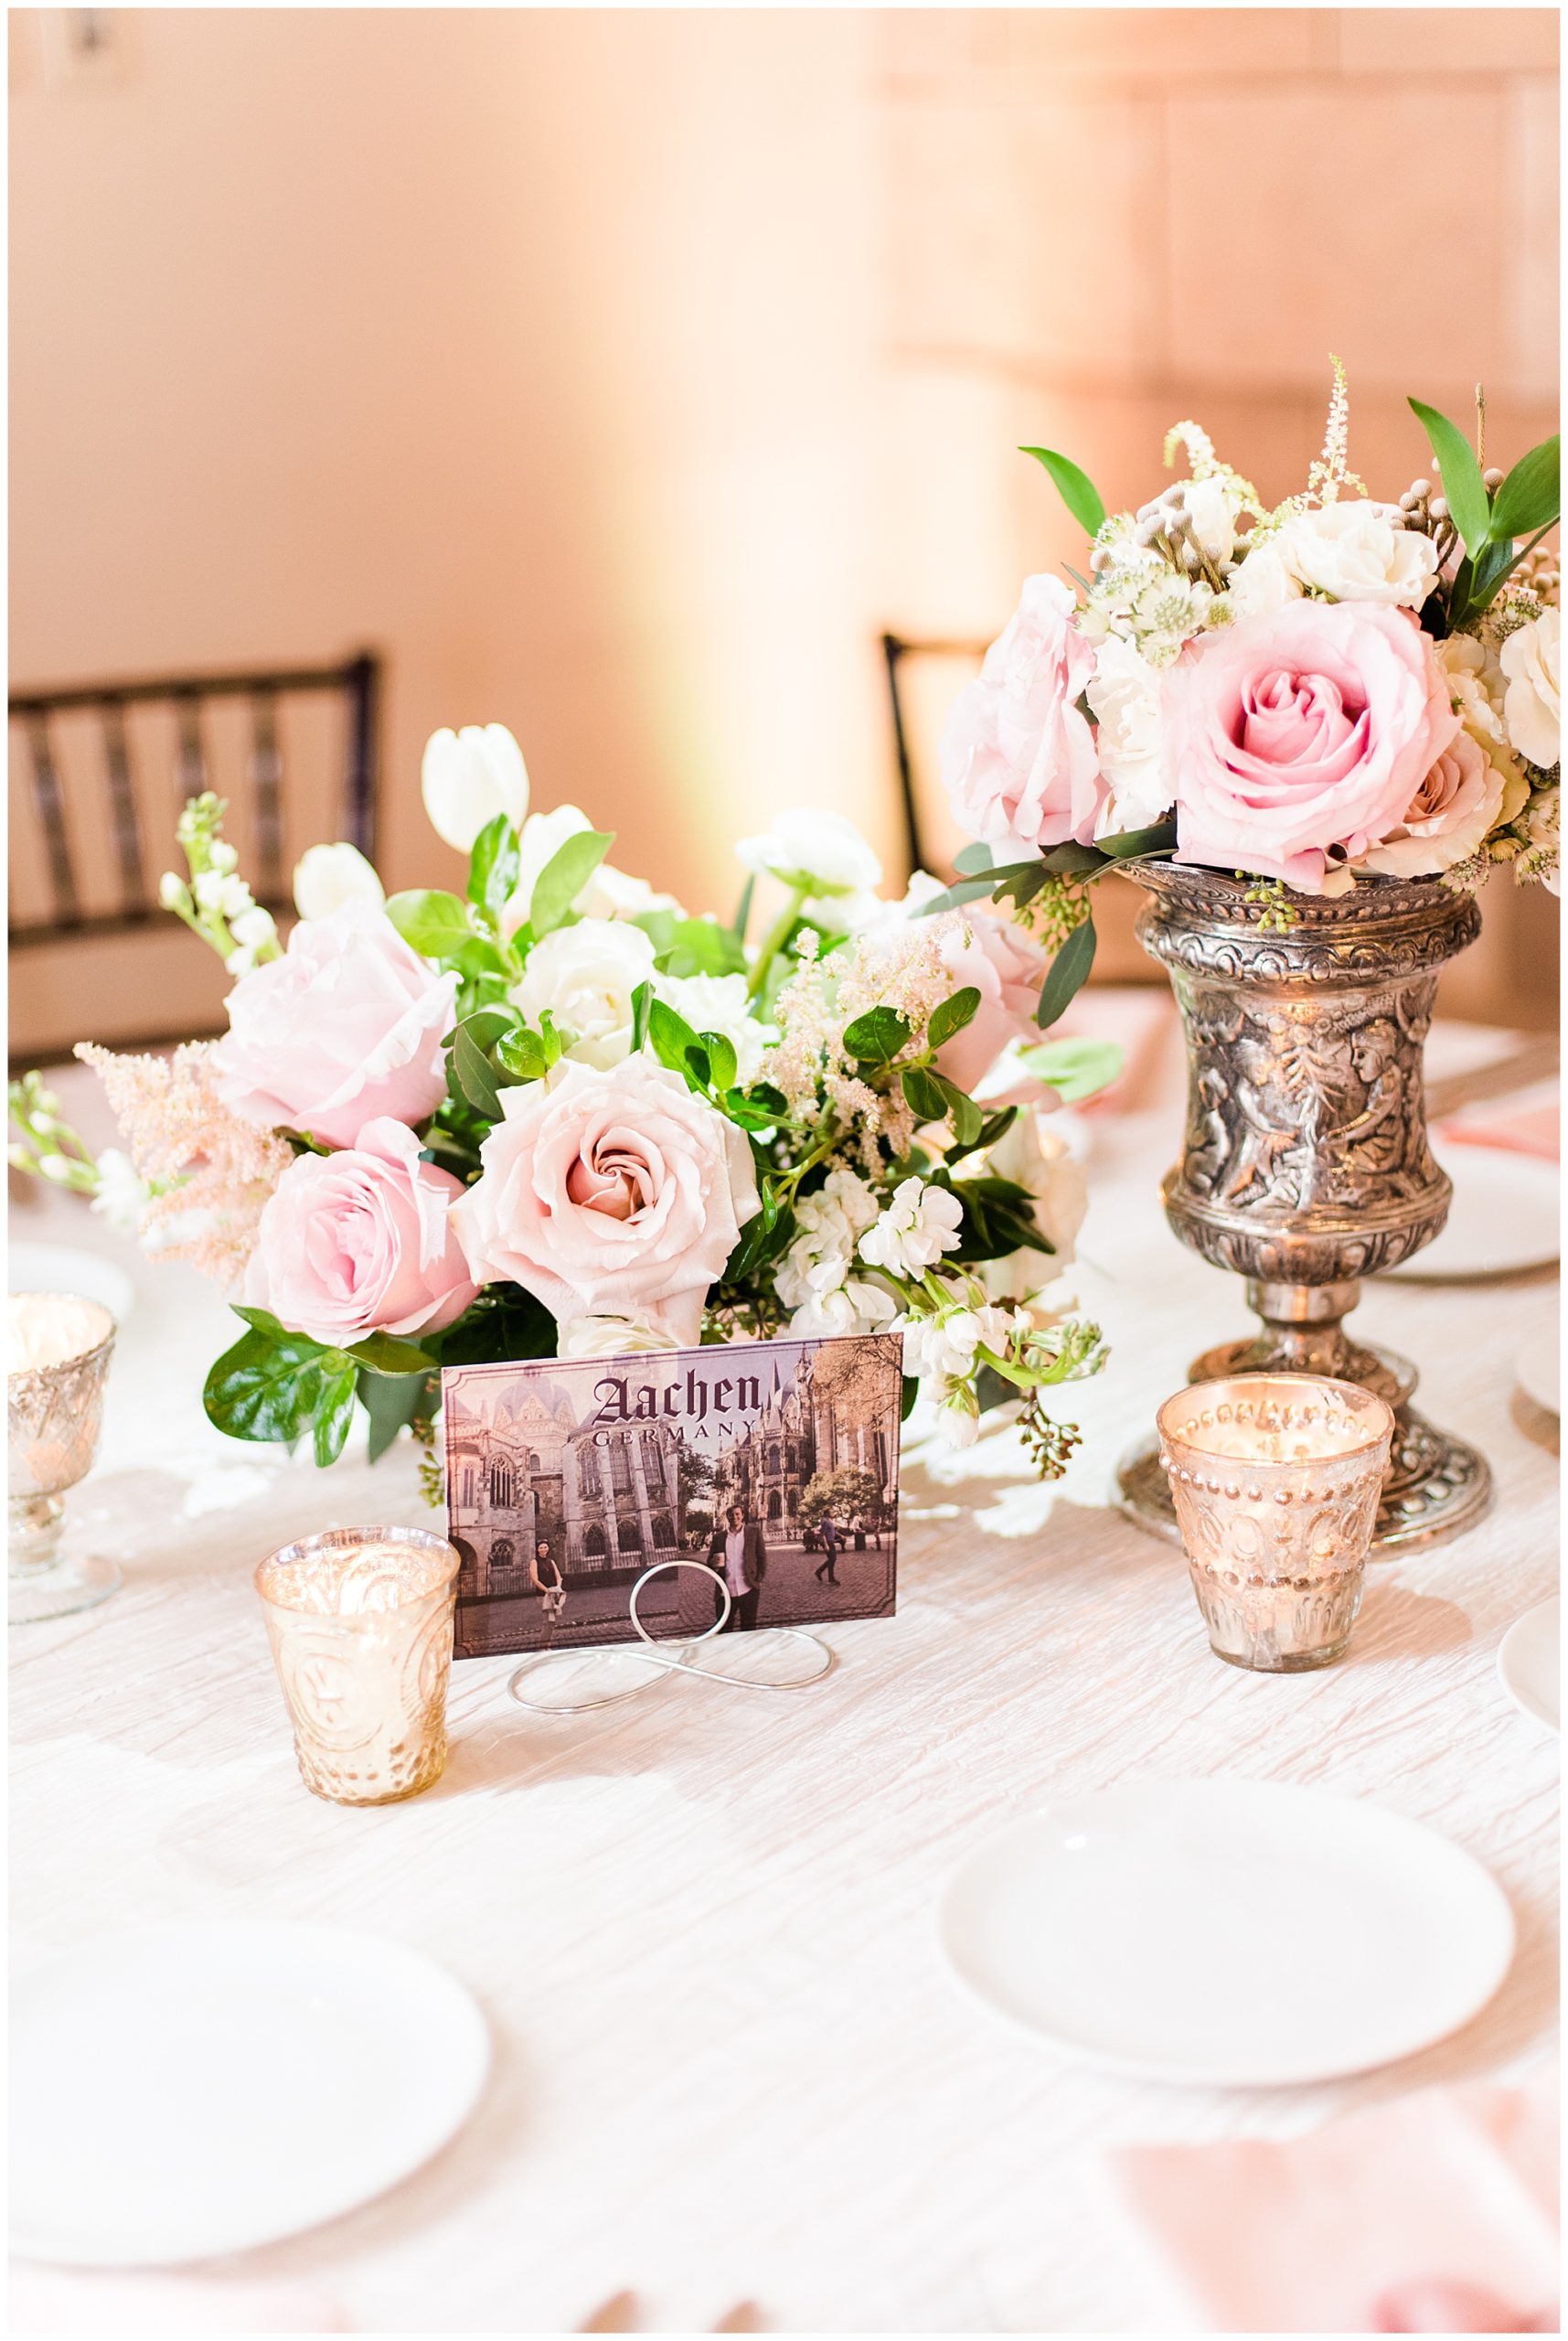 fairytale wedding reception at dover hall in pink and cream. by richmond rva wedding photographer, sarah & dave photography.